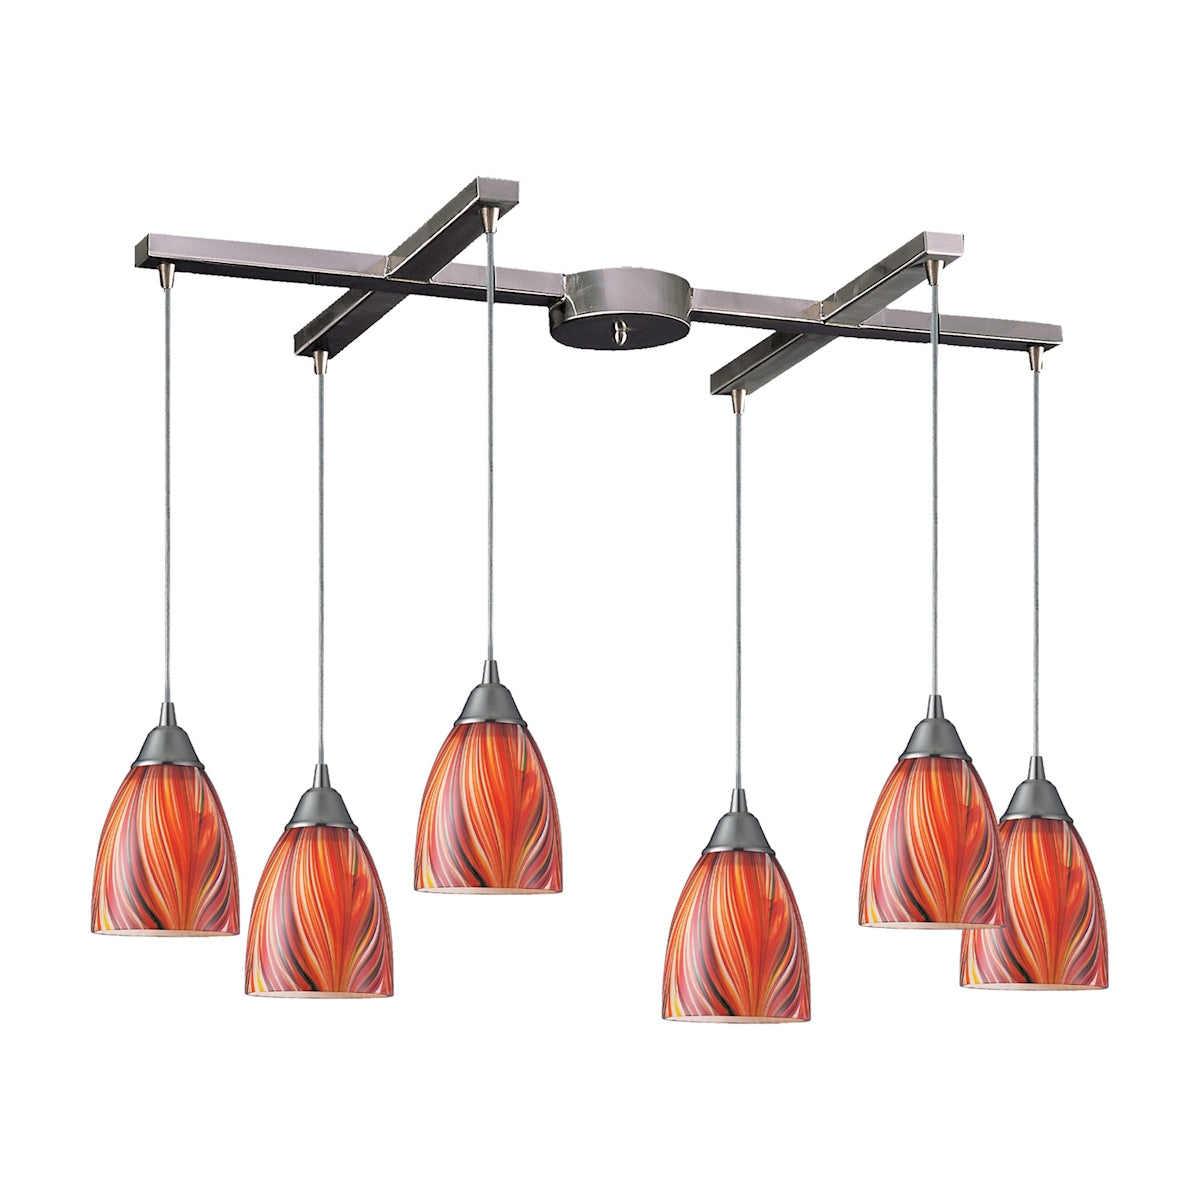 ELK Lighting 416-6M Arco Baleno 6-Light H-Bar Pendant Fixture in Satin Nickel with Multi-colored Glass